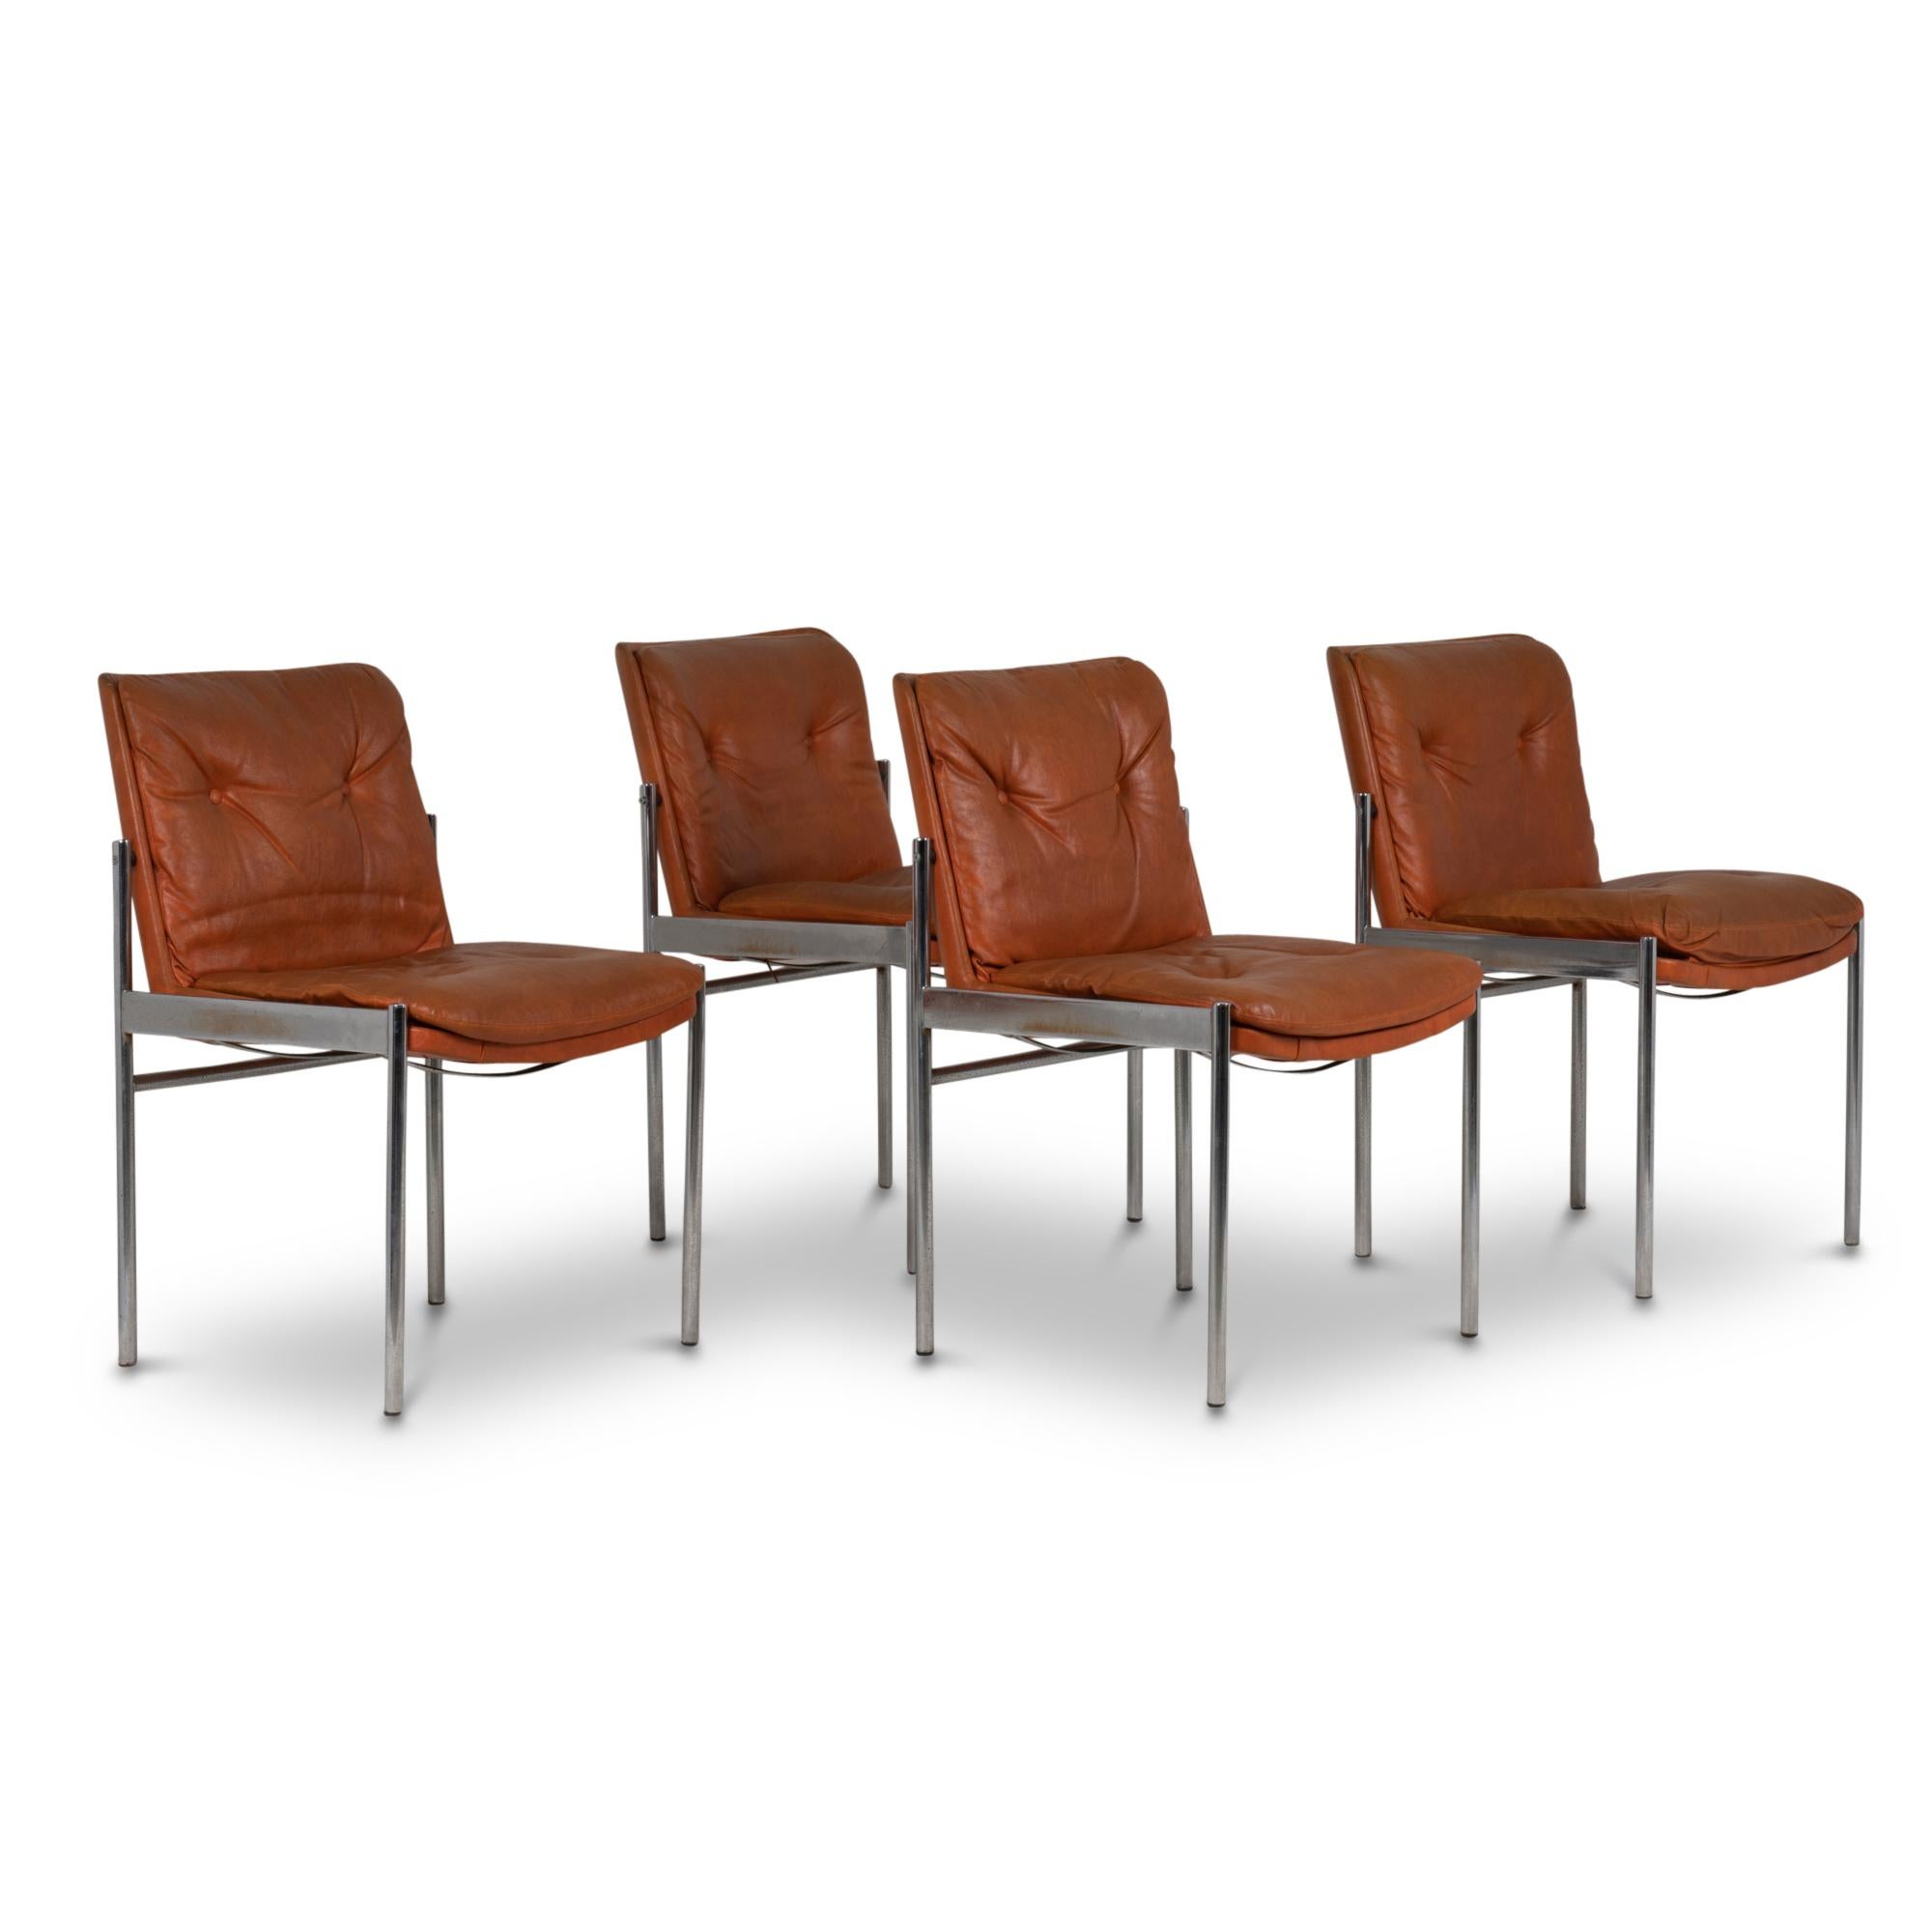 Series of twelve chairs, rectangular in shape. Seat and backrest in faux leather in fawn color. Base in chromed metal.

Italian work realized in the 1970s.